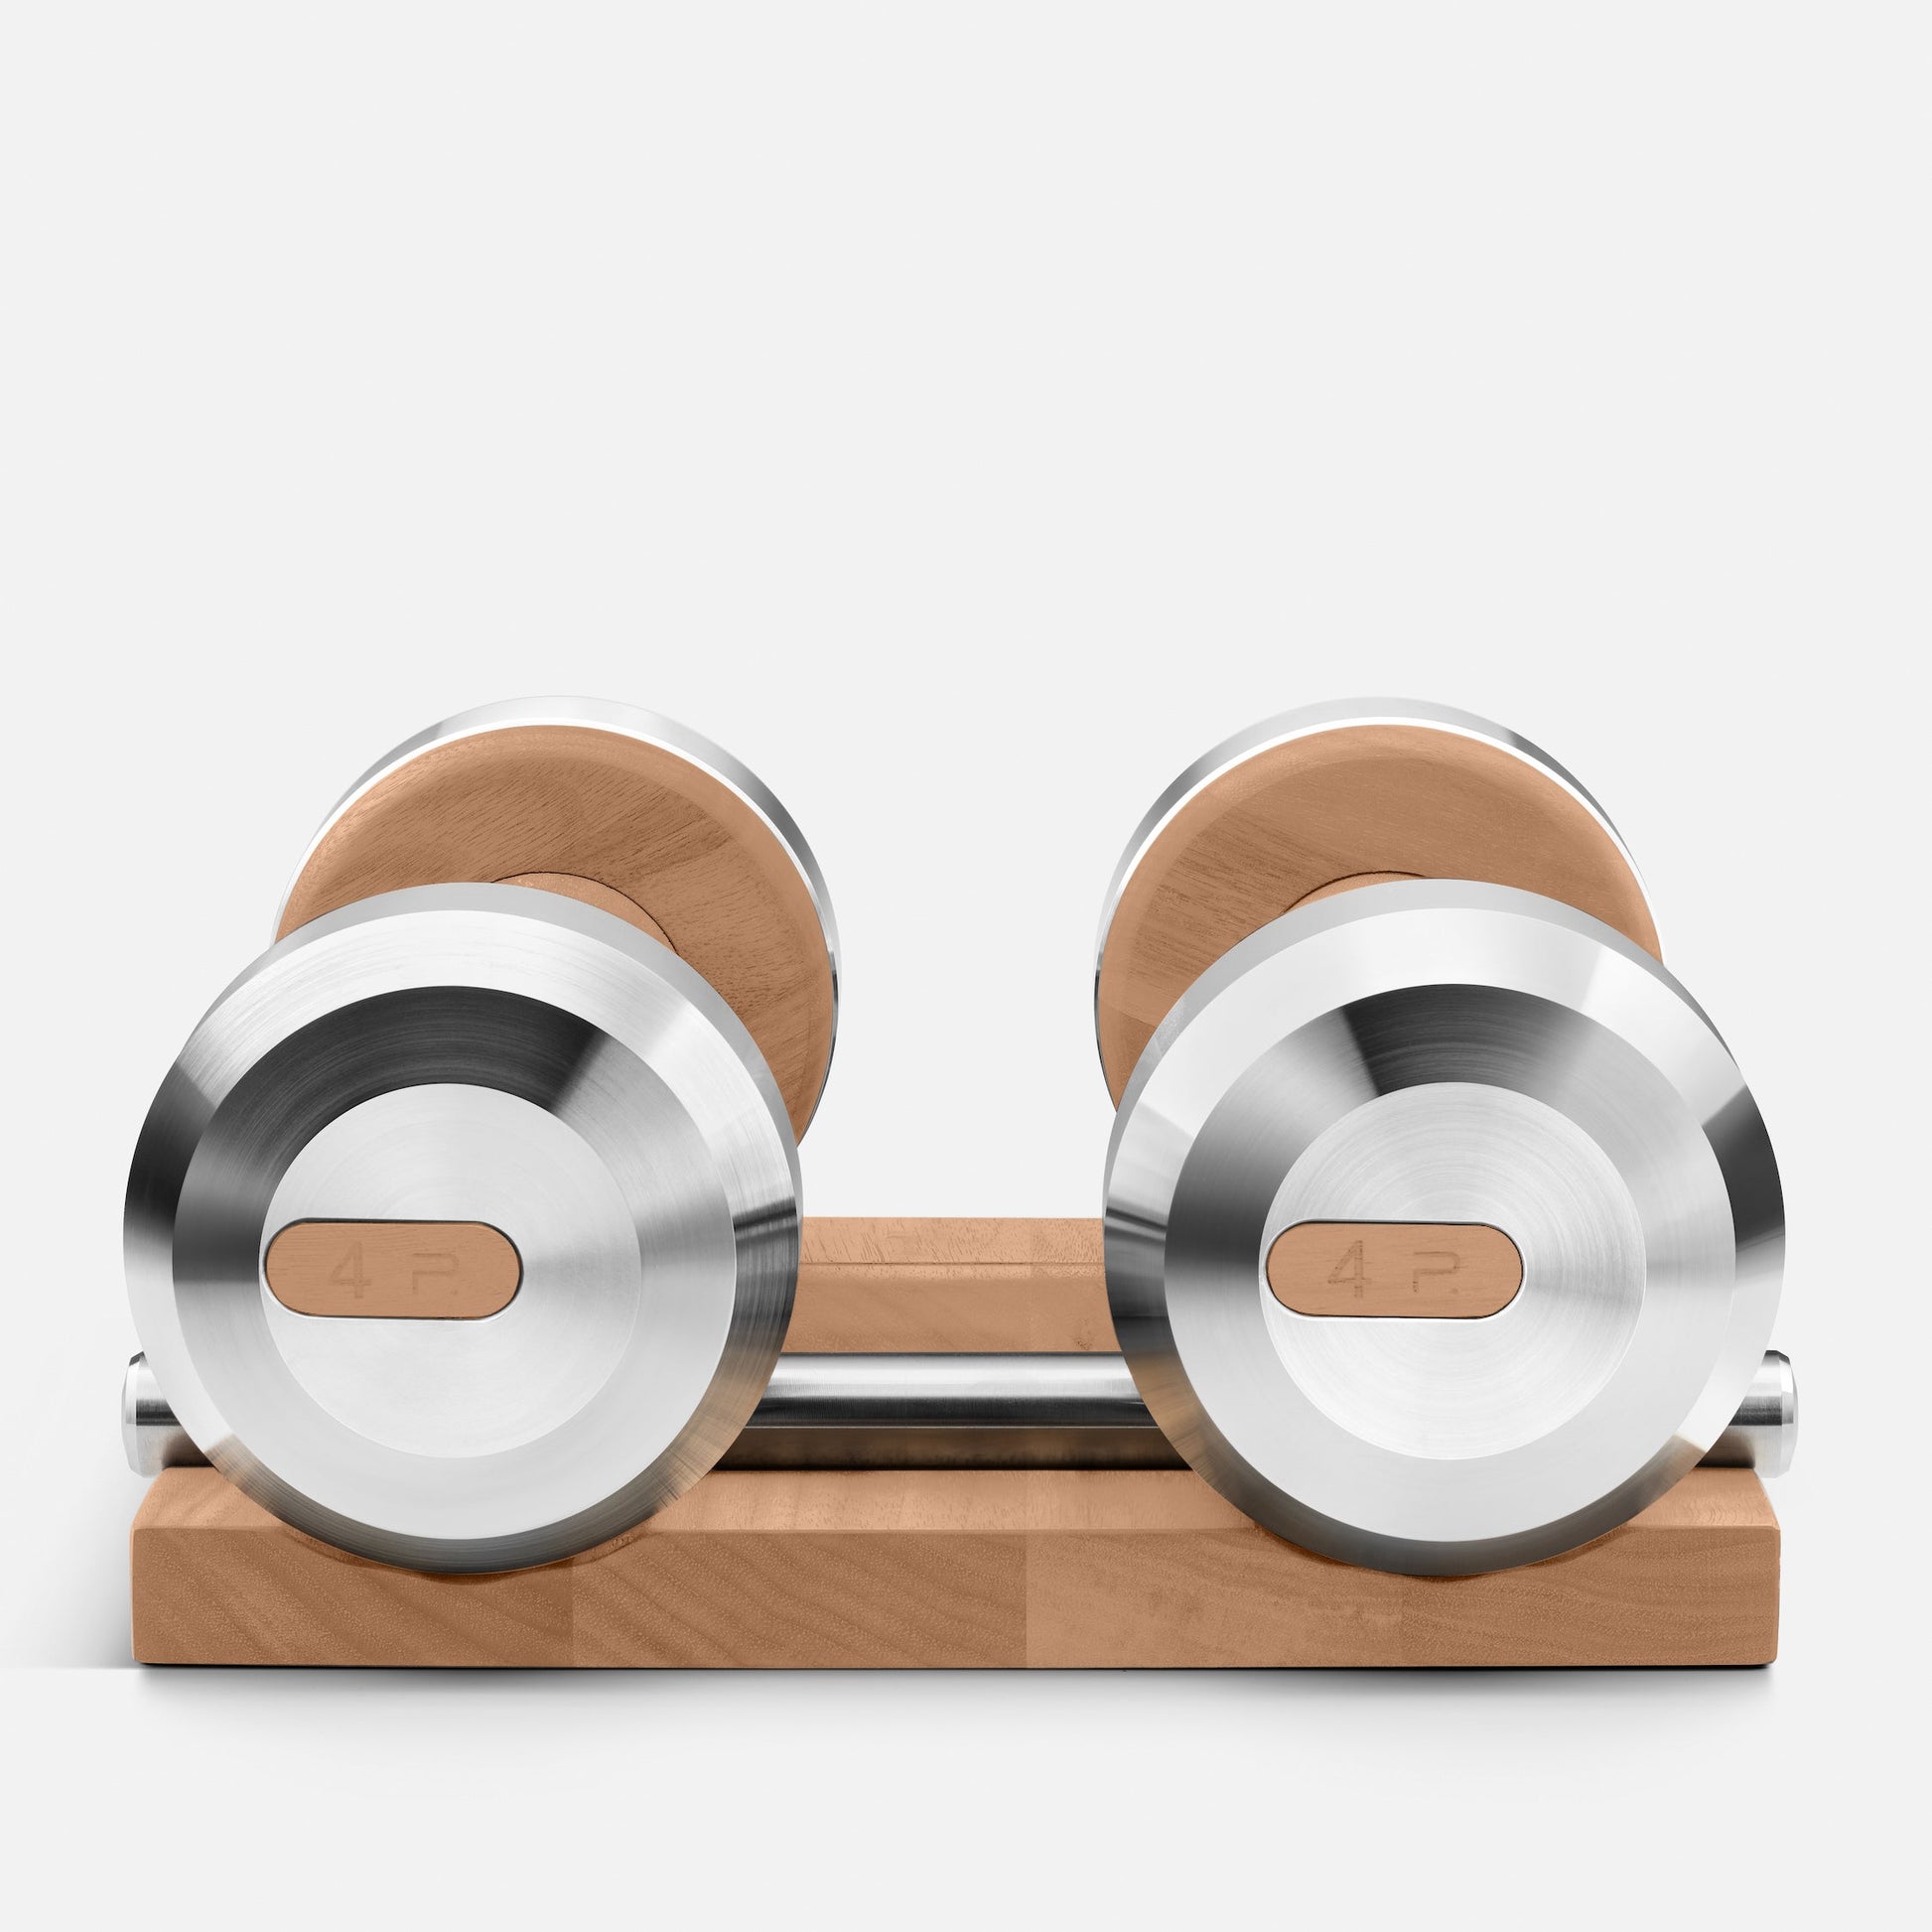 PENT x Cycling Bears Luxury Customisable Dumbbells with a solid wooden stand, made of natural material. Available in weights ranging between 2 - 30kg.